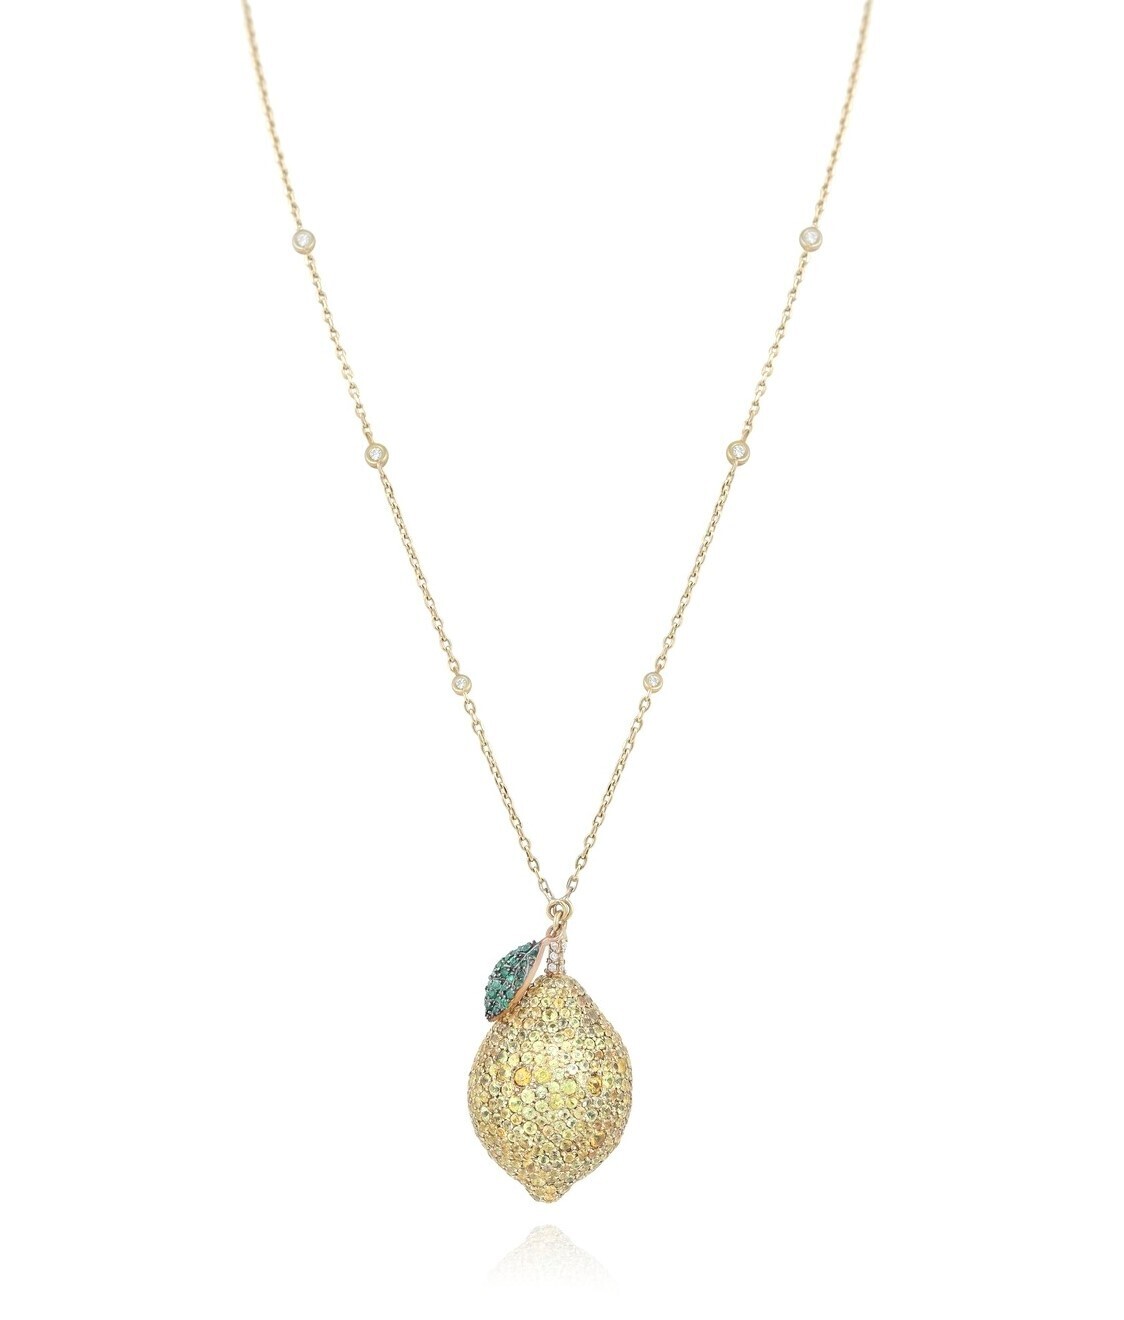 Eternal Diamond Lemon Necklace with Sapphire and Emerald